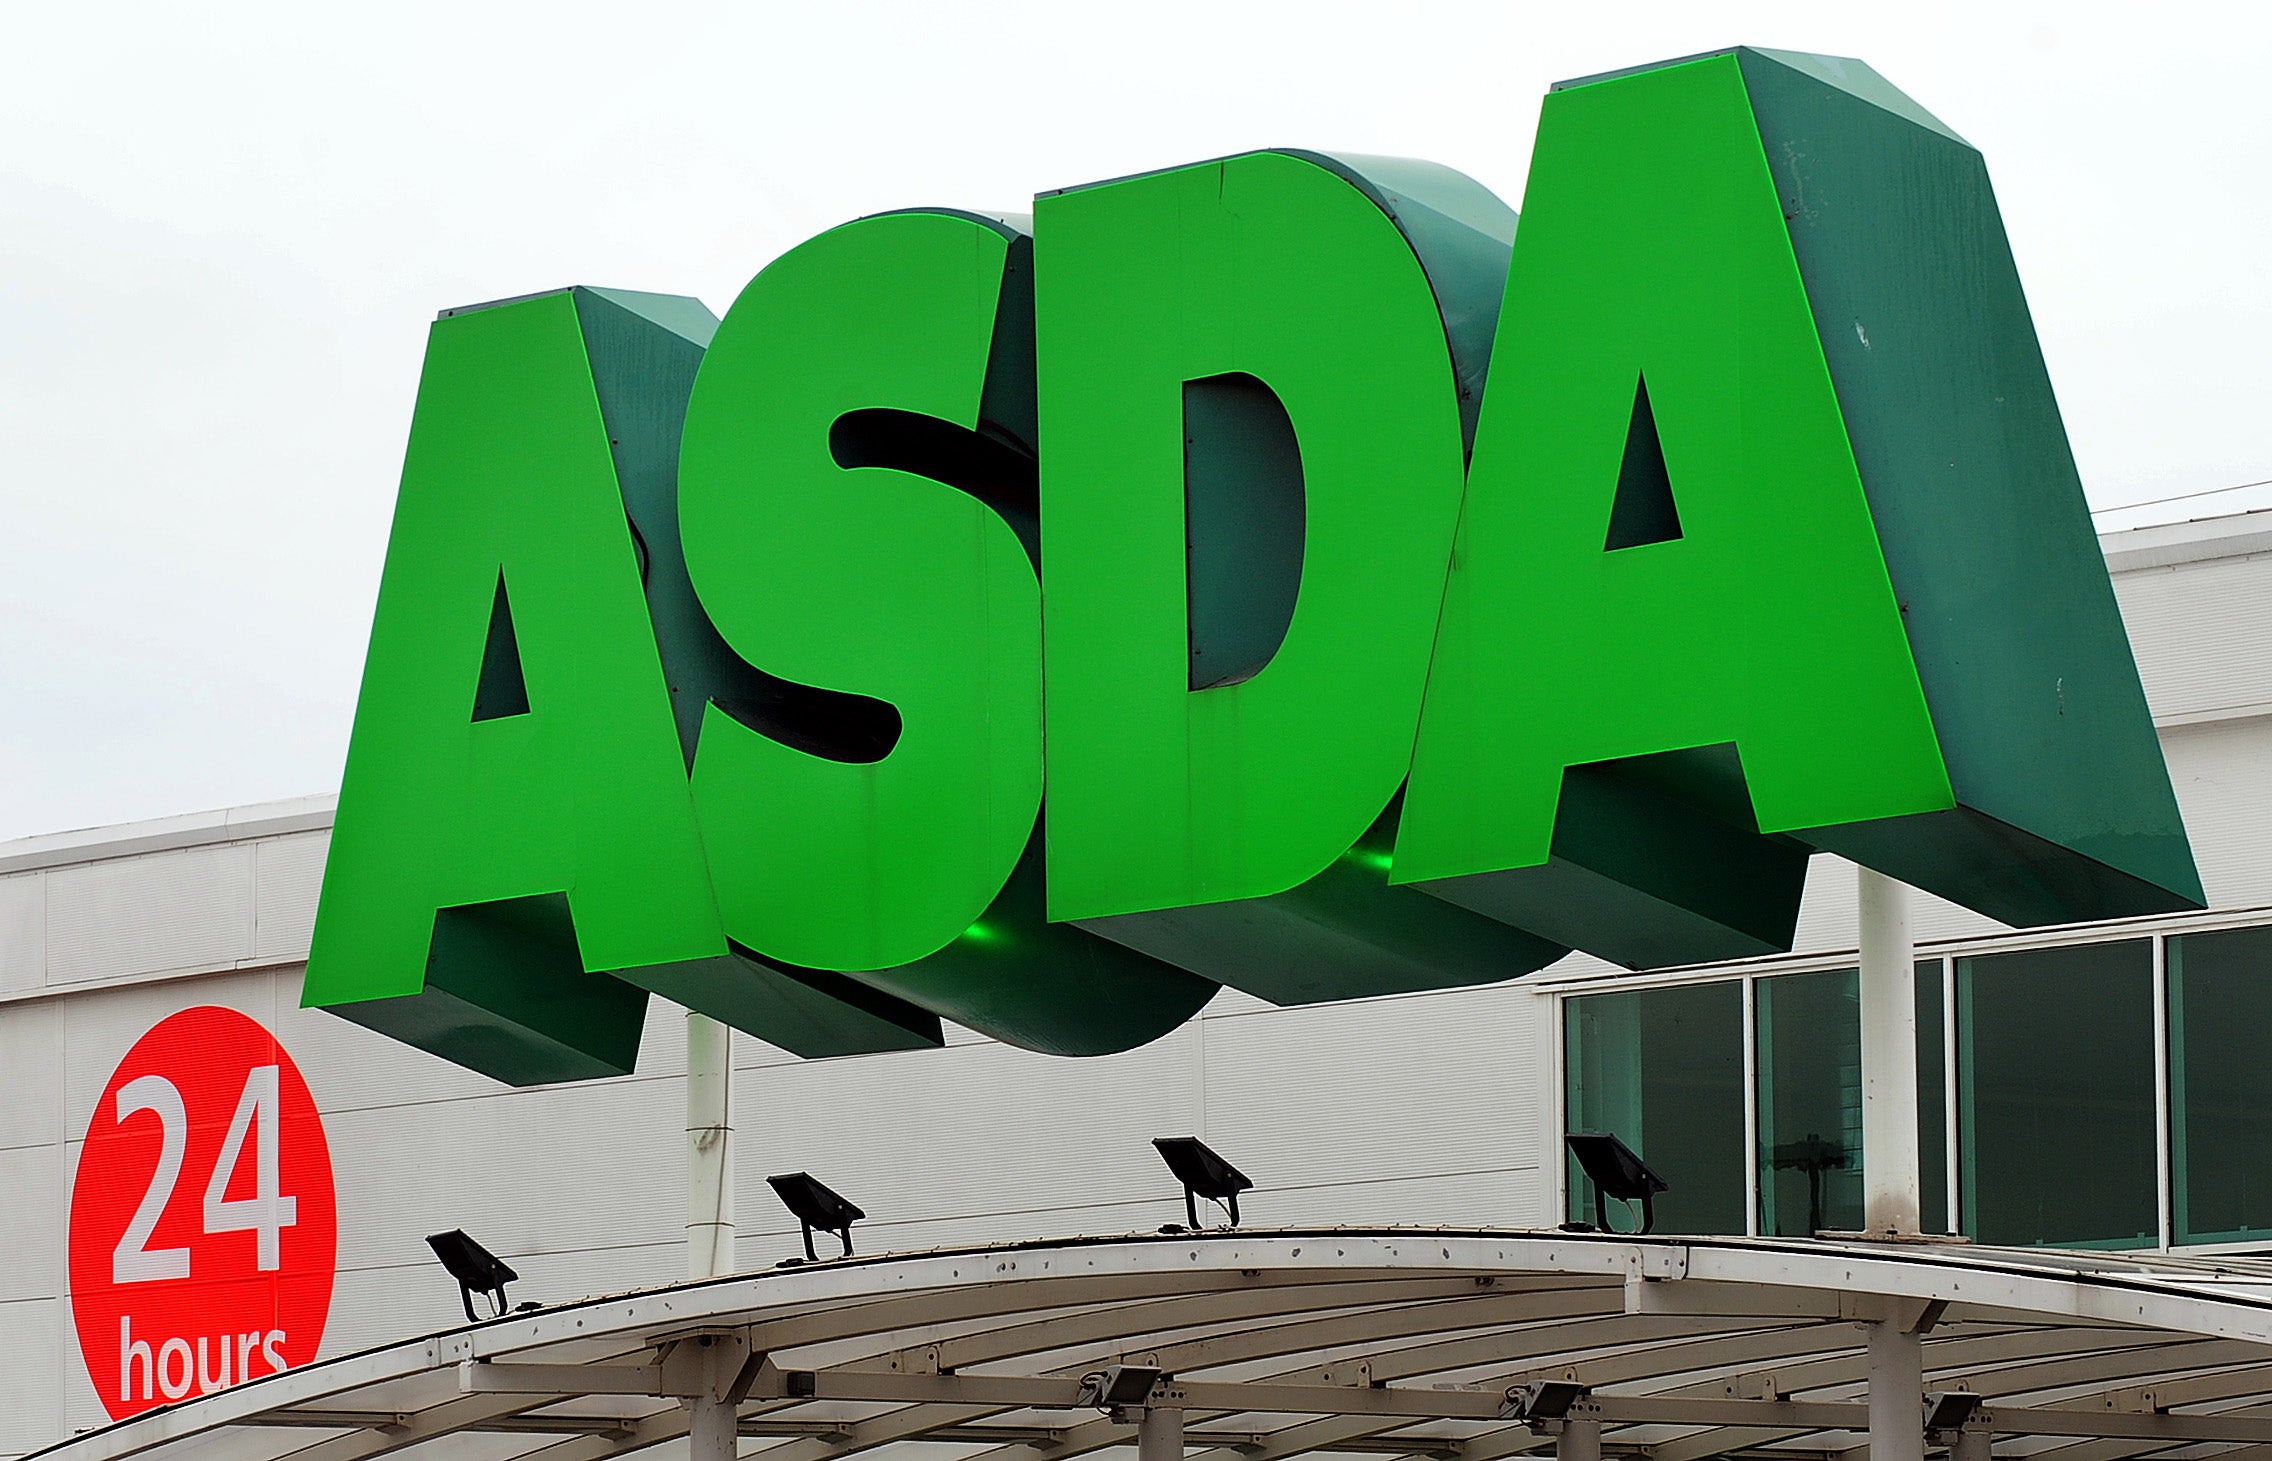 Asda says it’s going to add more green products